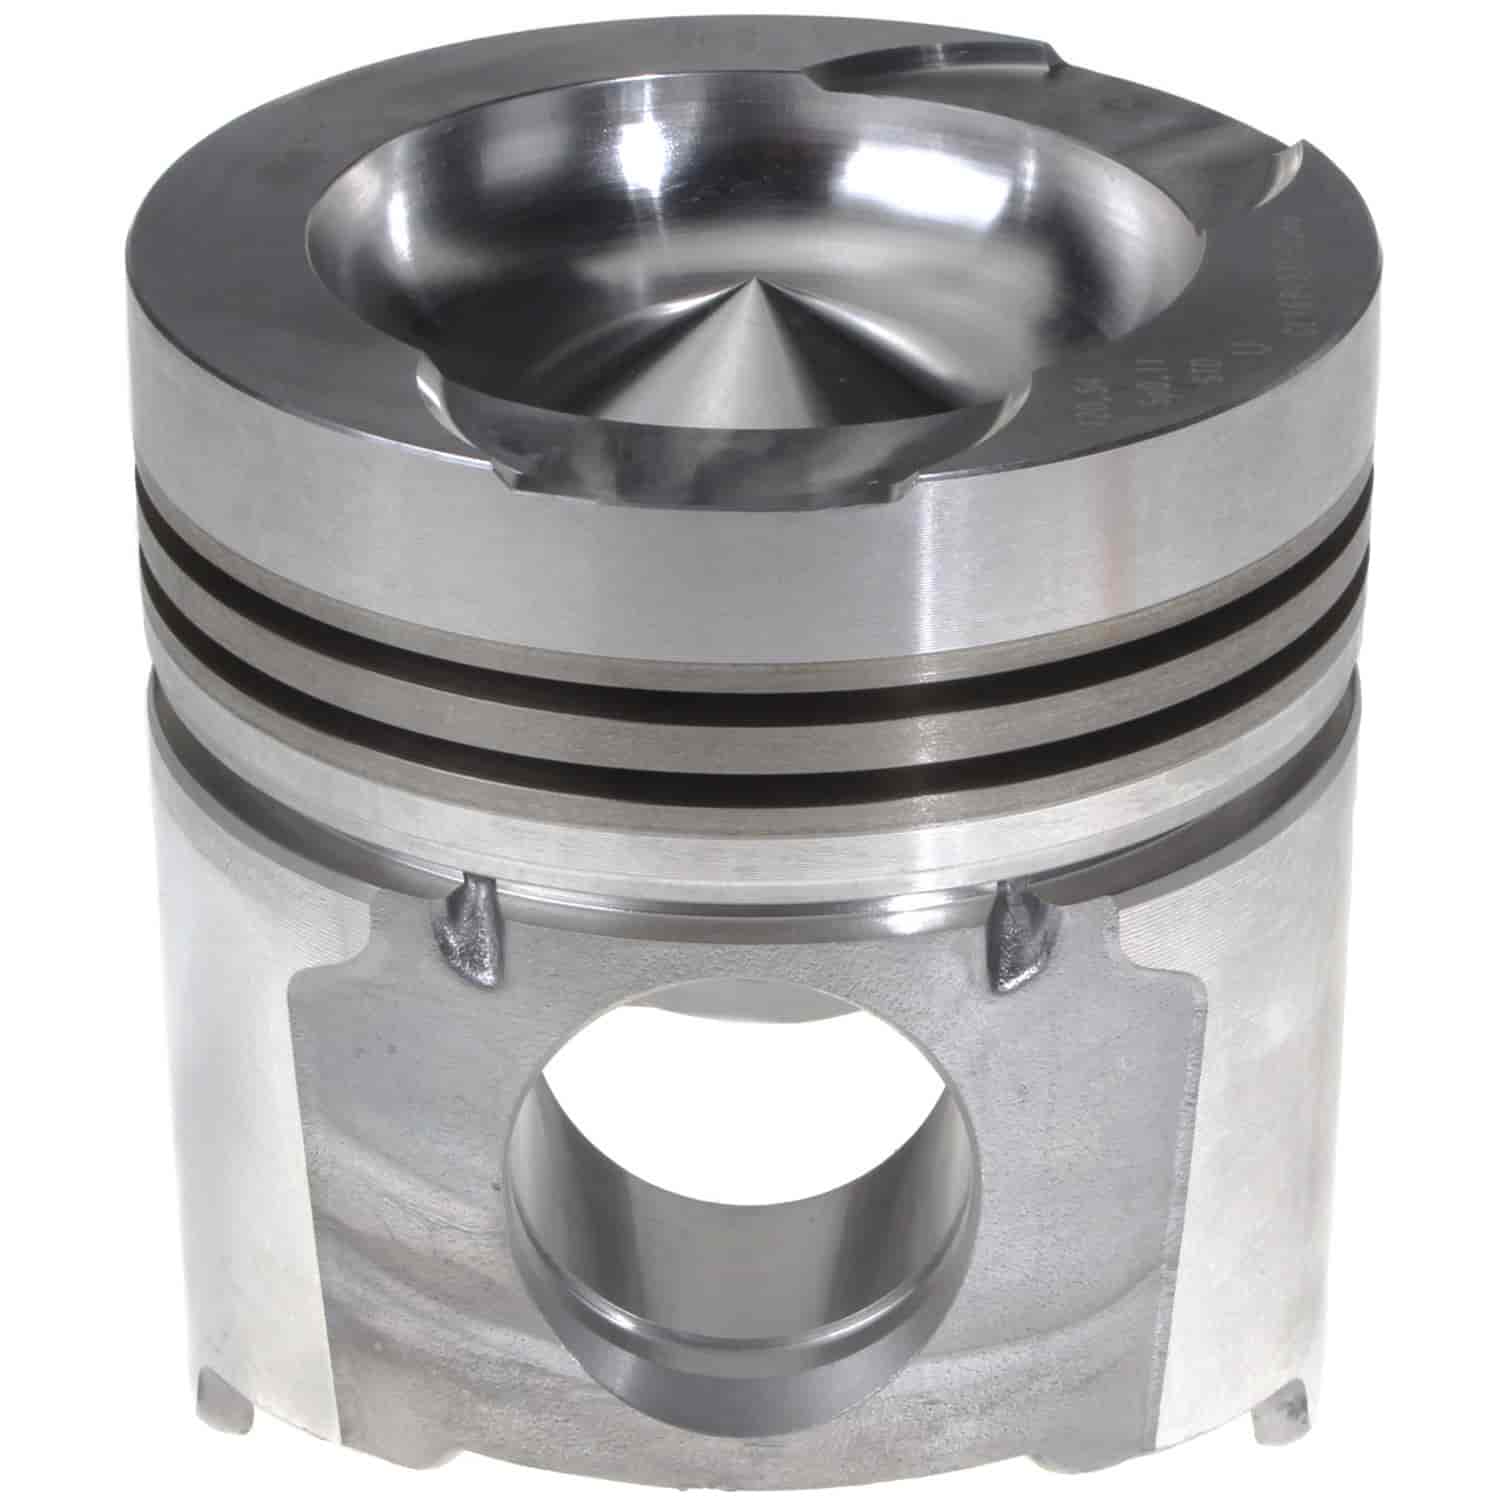 Piston Without Piston Pin Cat. 121mm/4.750 Bore 3300 OE#1684531 6.0 1 CR 1.700 Pin